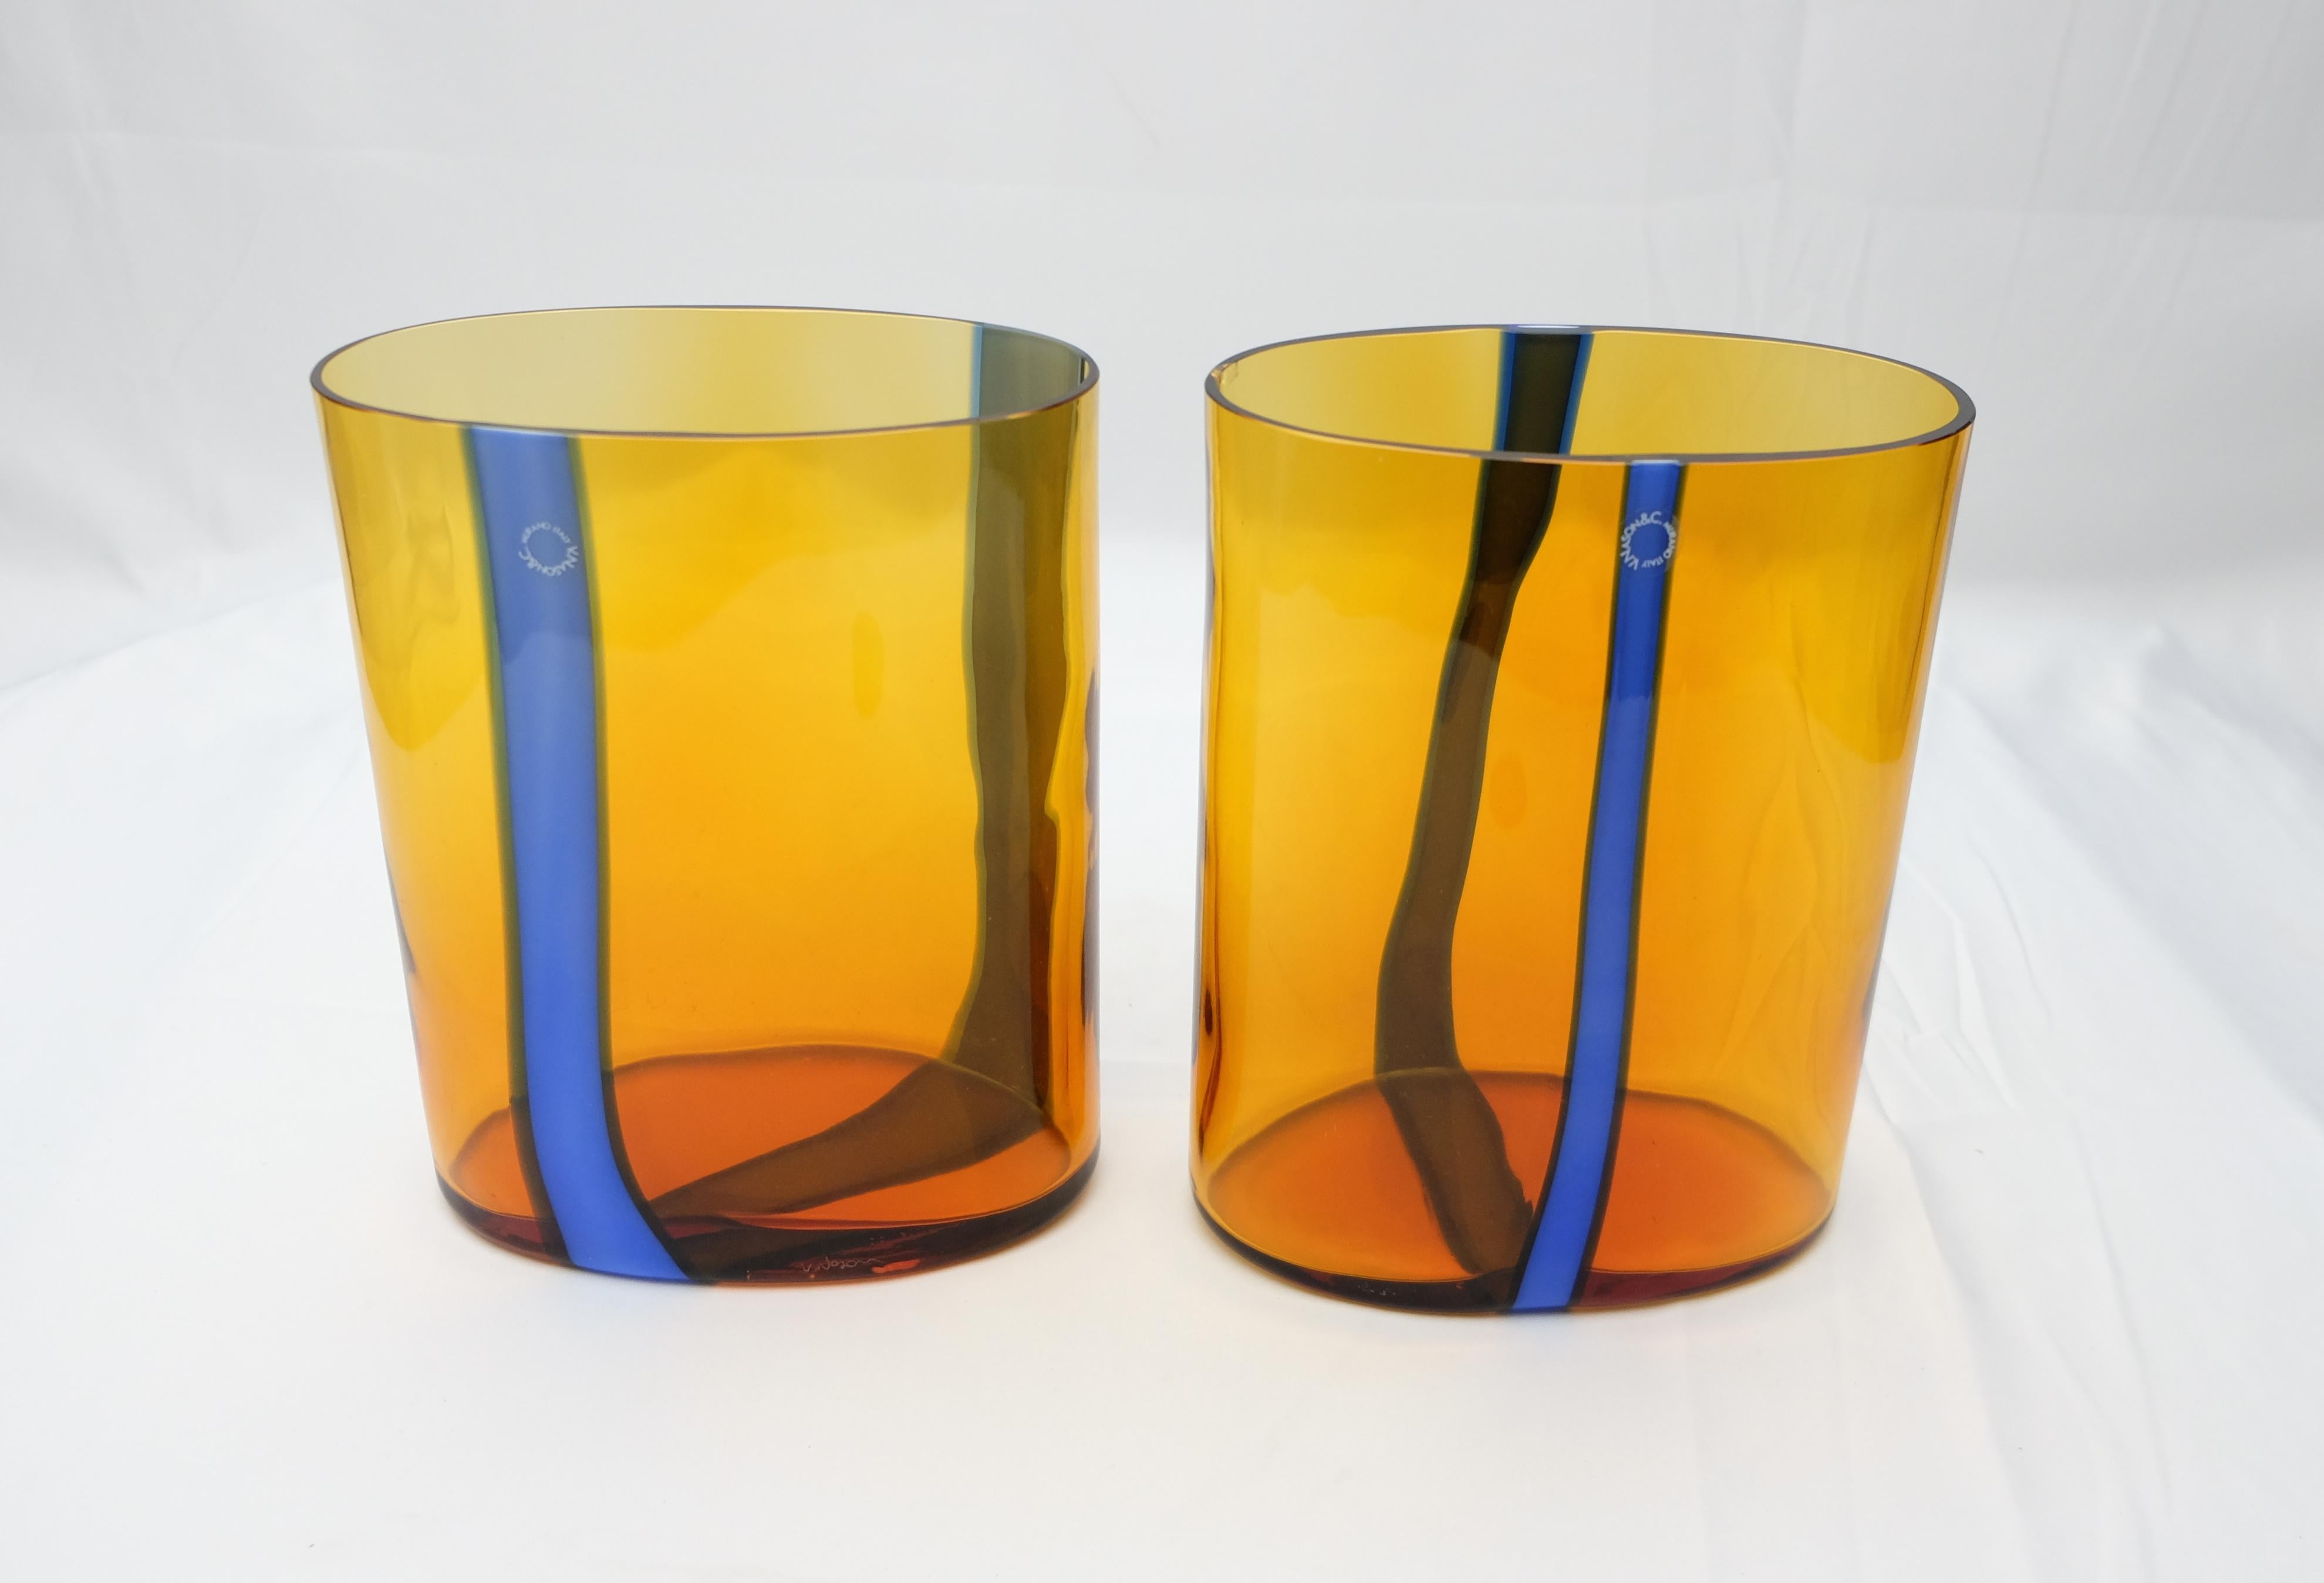 Offered for sale is a two-piece amber and blue Murano glass vases set by V. Nason & C. of Italy. The vases retain the maker's labels. Vincenzo Nason established his glassworks, Vincenzo Nason & Co. (VNC) on the island of Murano, Venice, Italy in